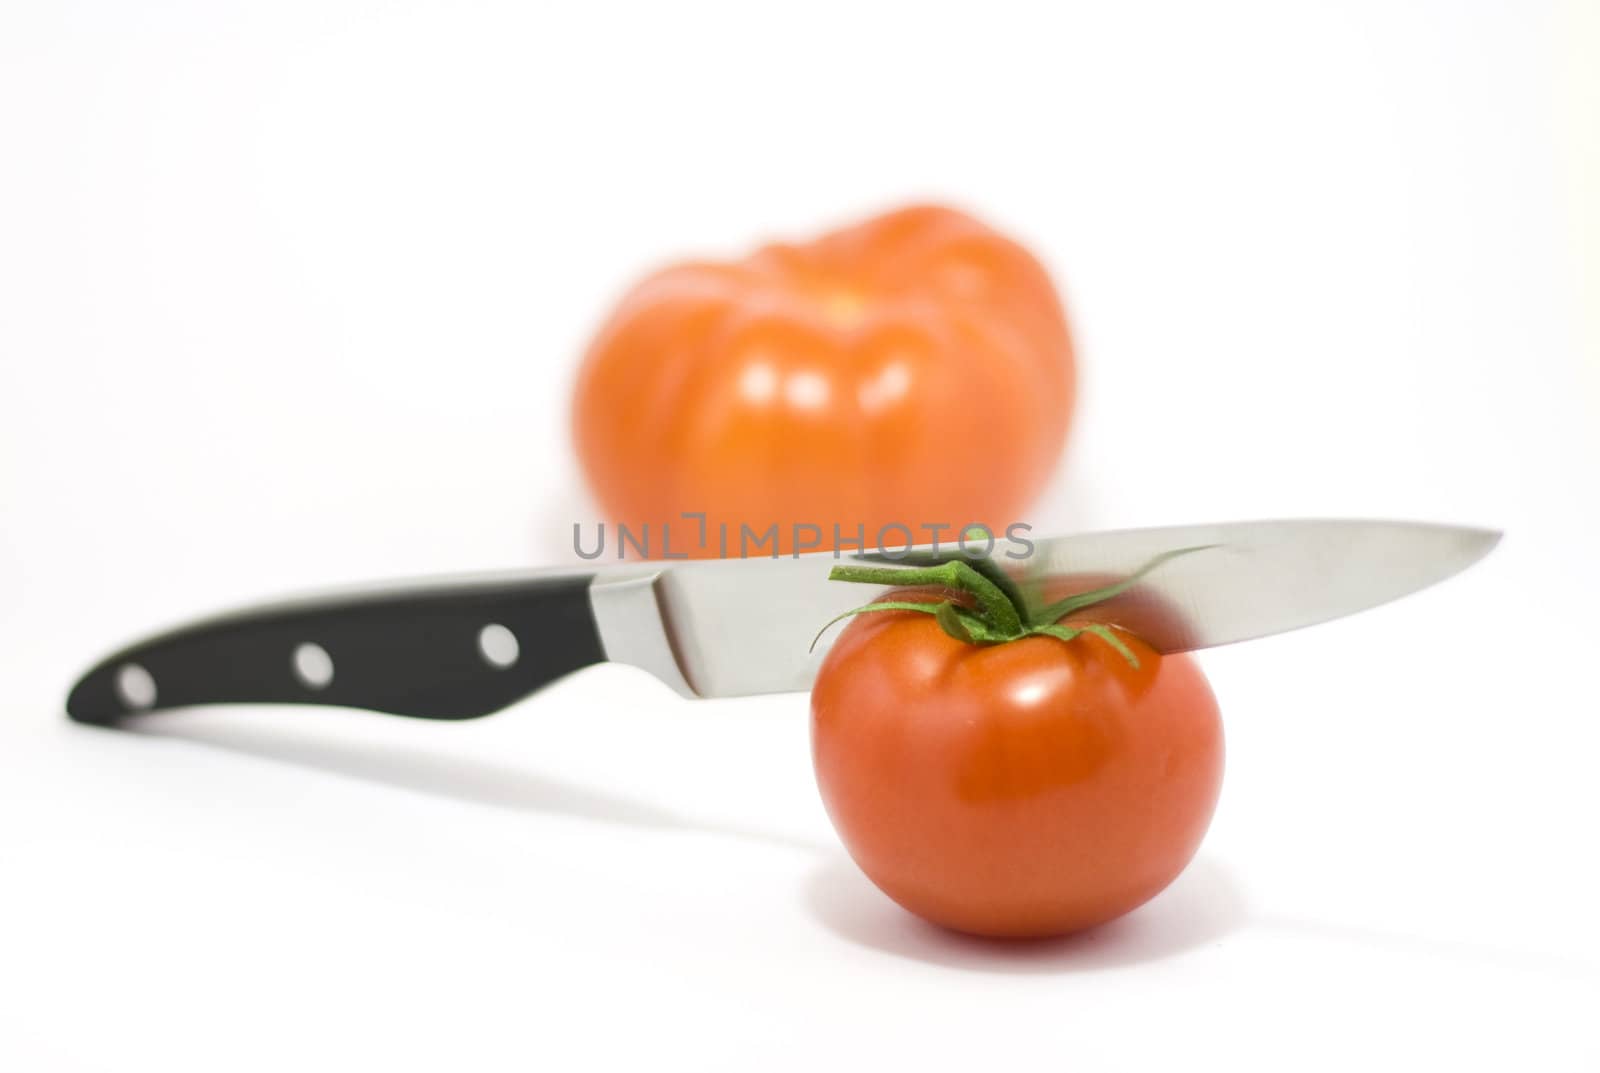 Knife and tomato isolated on white